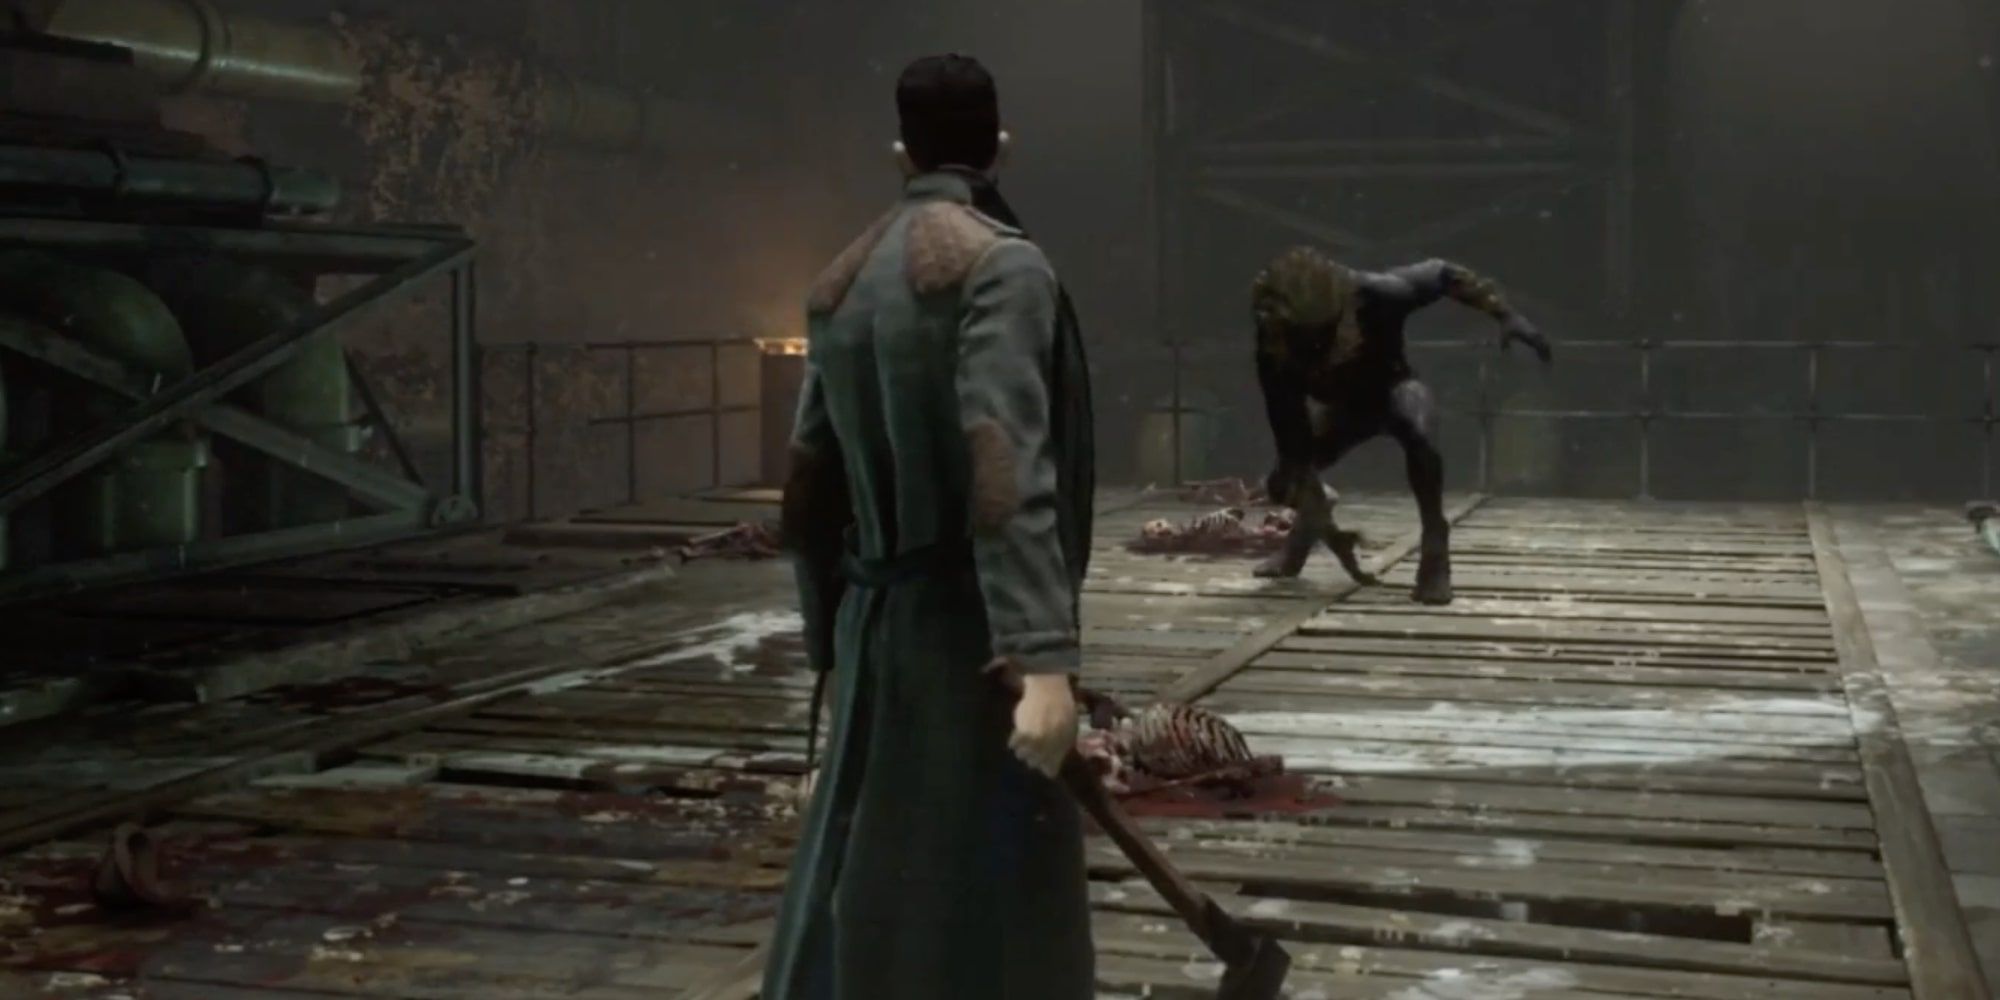 Jonathan fights the Sewer Beast In Vampyr.